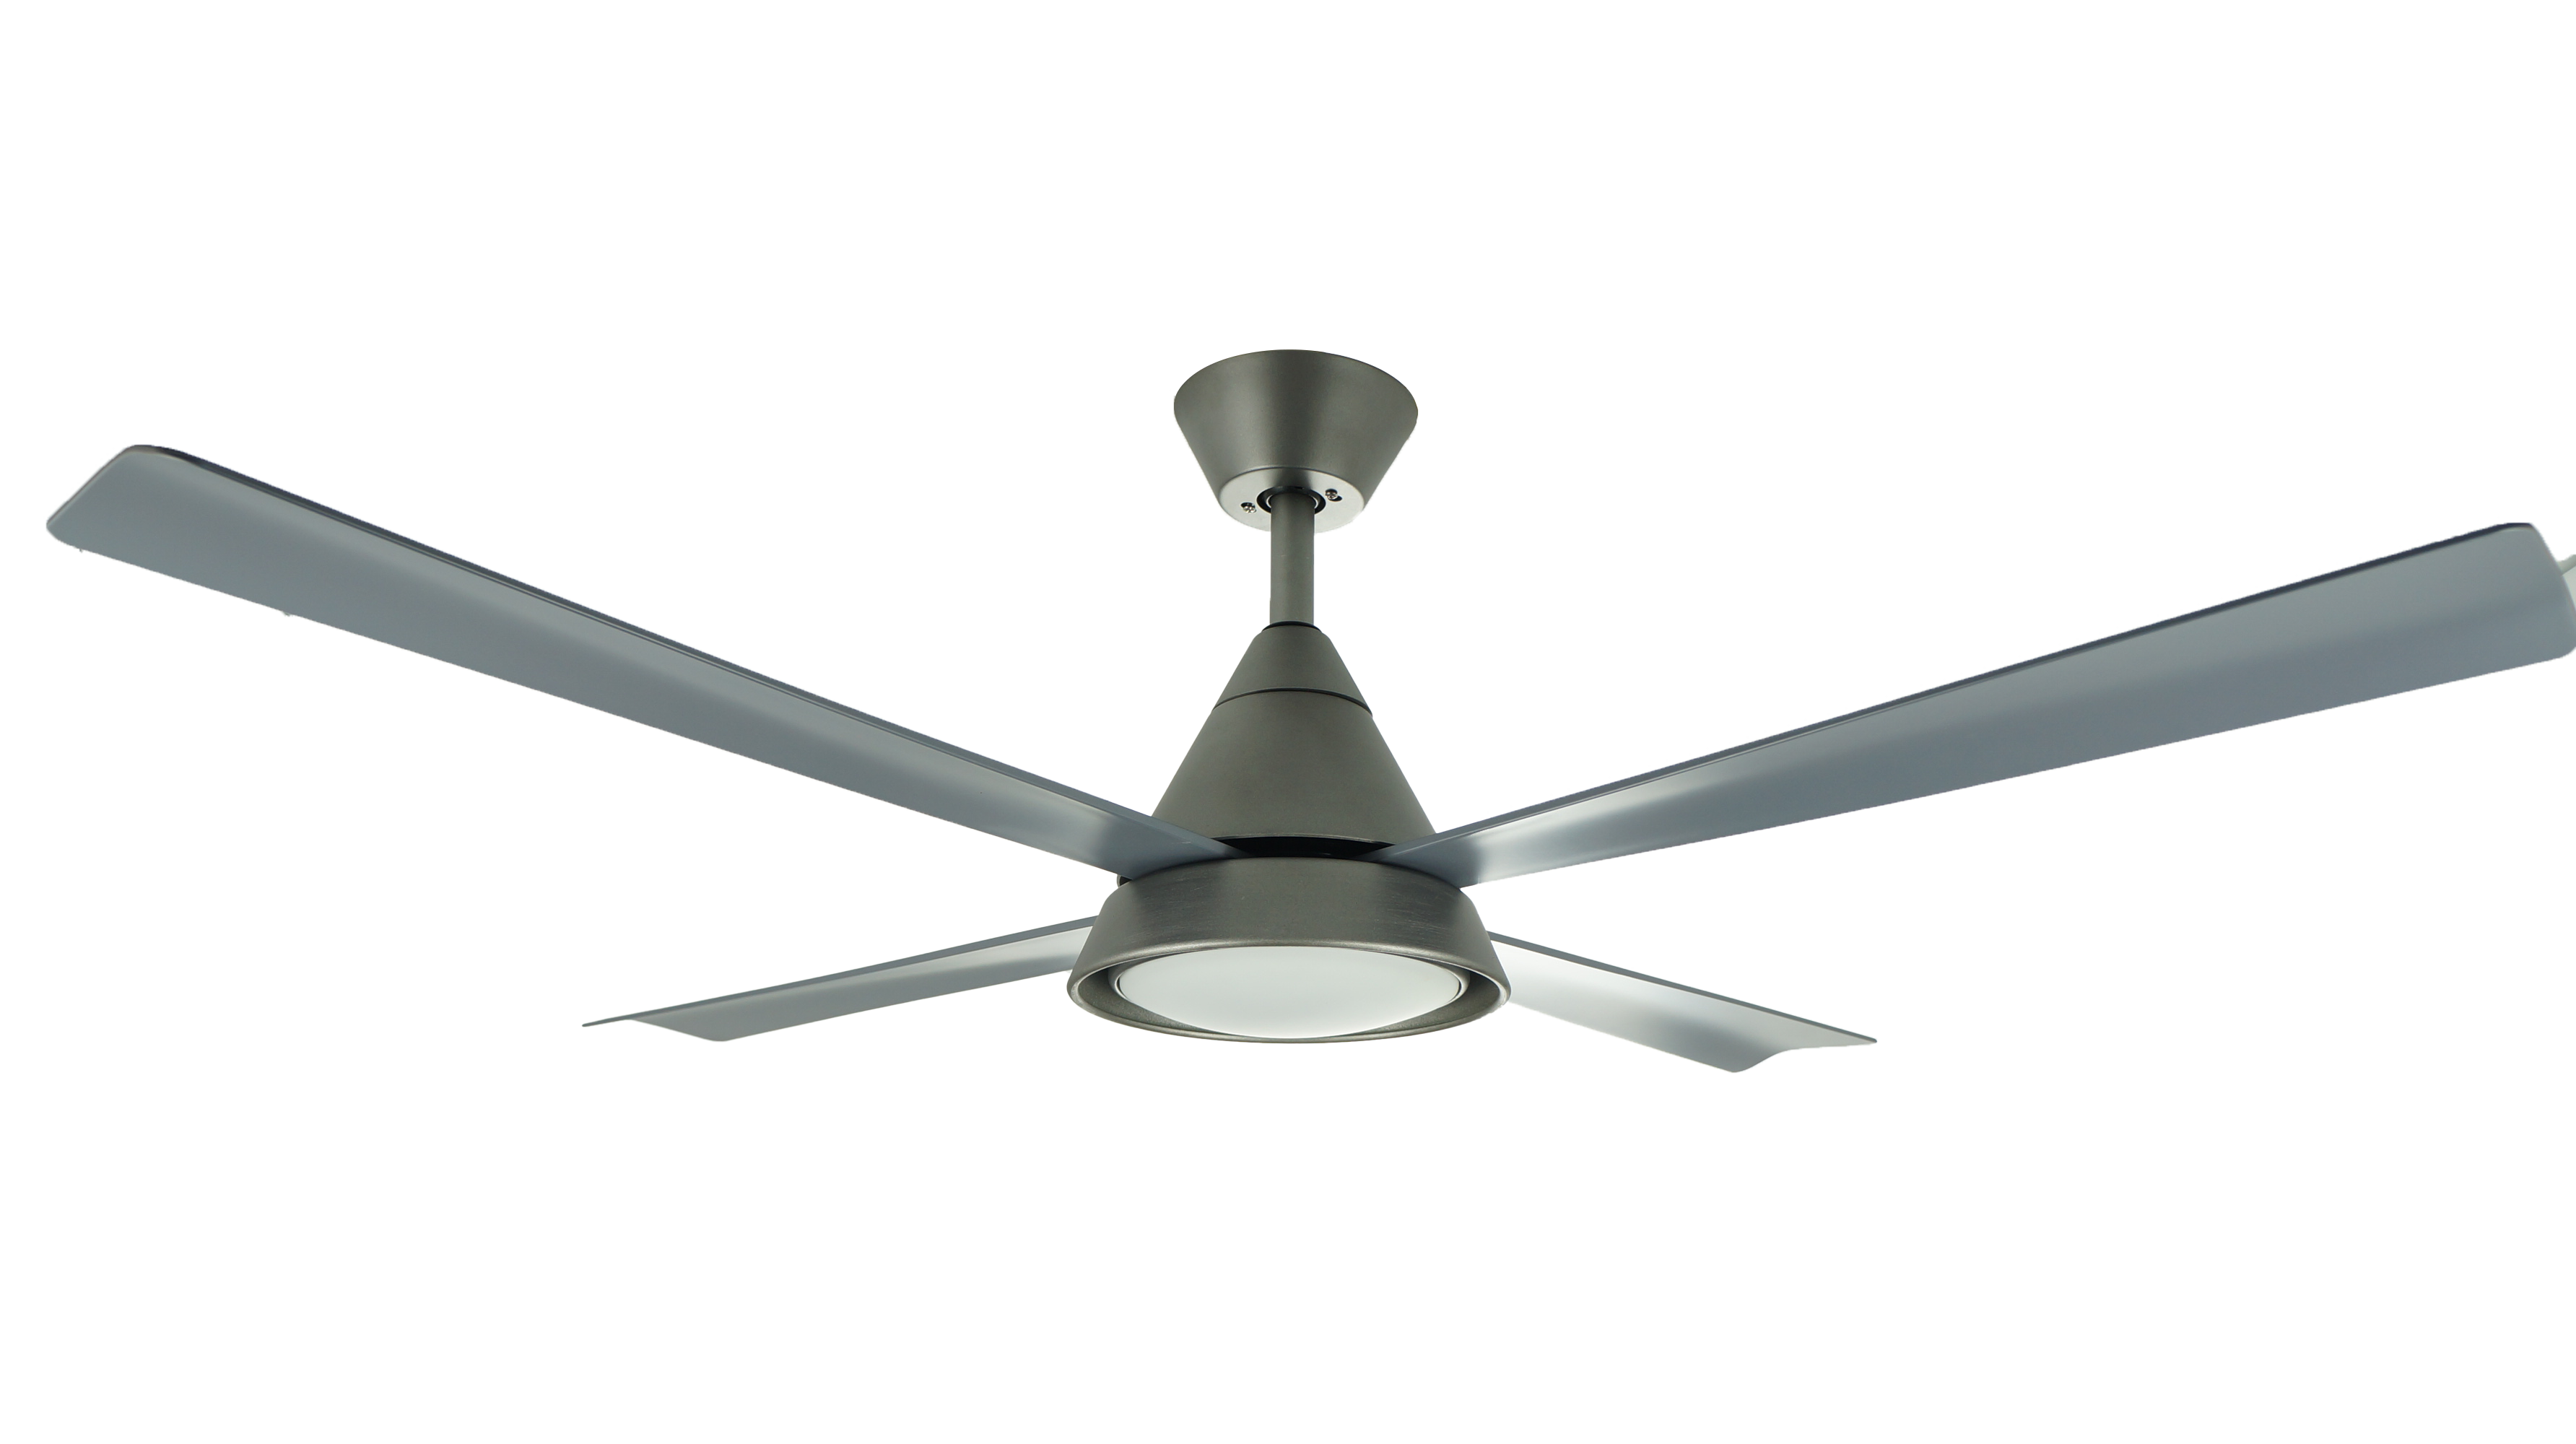 52inch Modern DC Motor Decorative Hotel Ceiling Fan Nature Air Flow Soft Warm Led Lamp And Remote Control